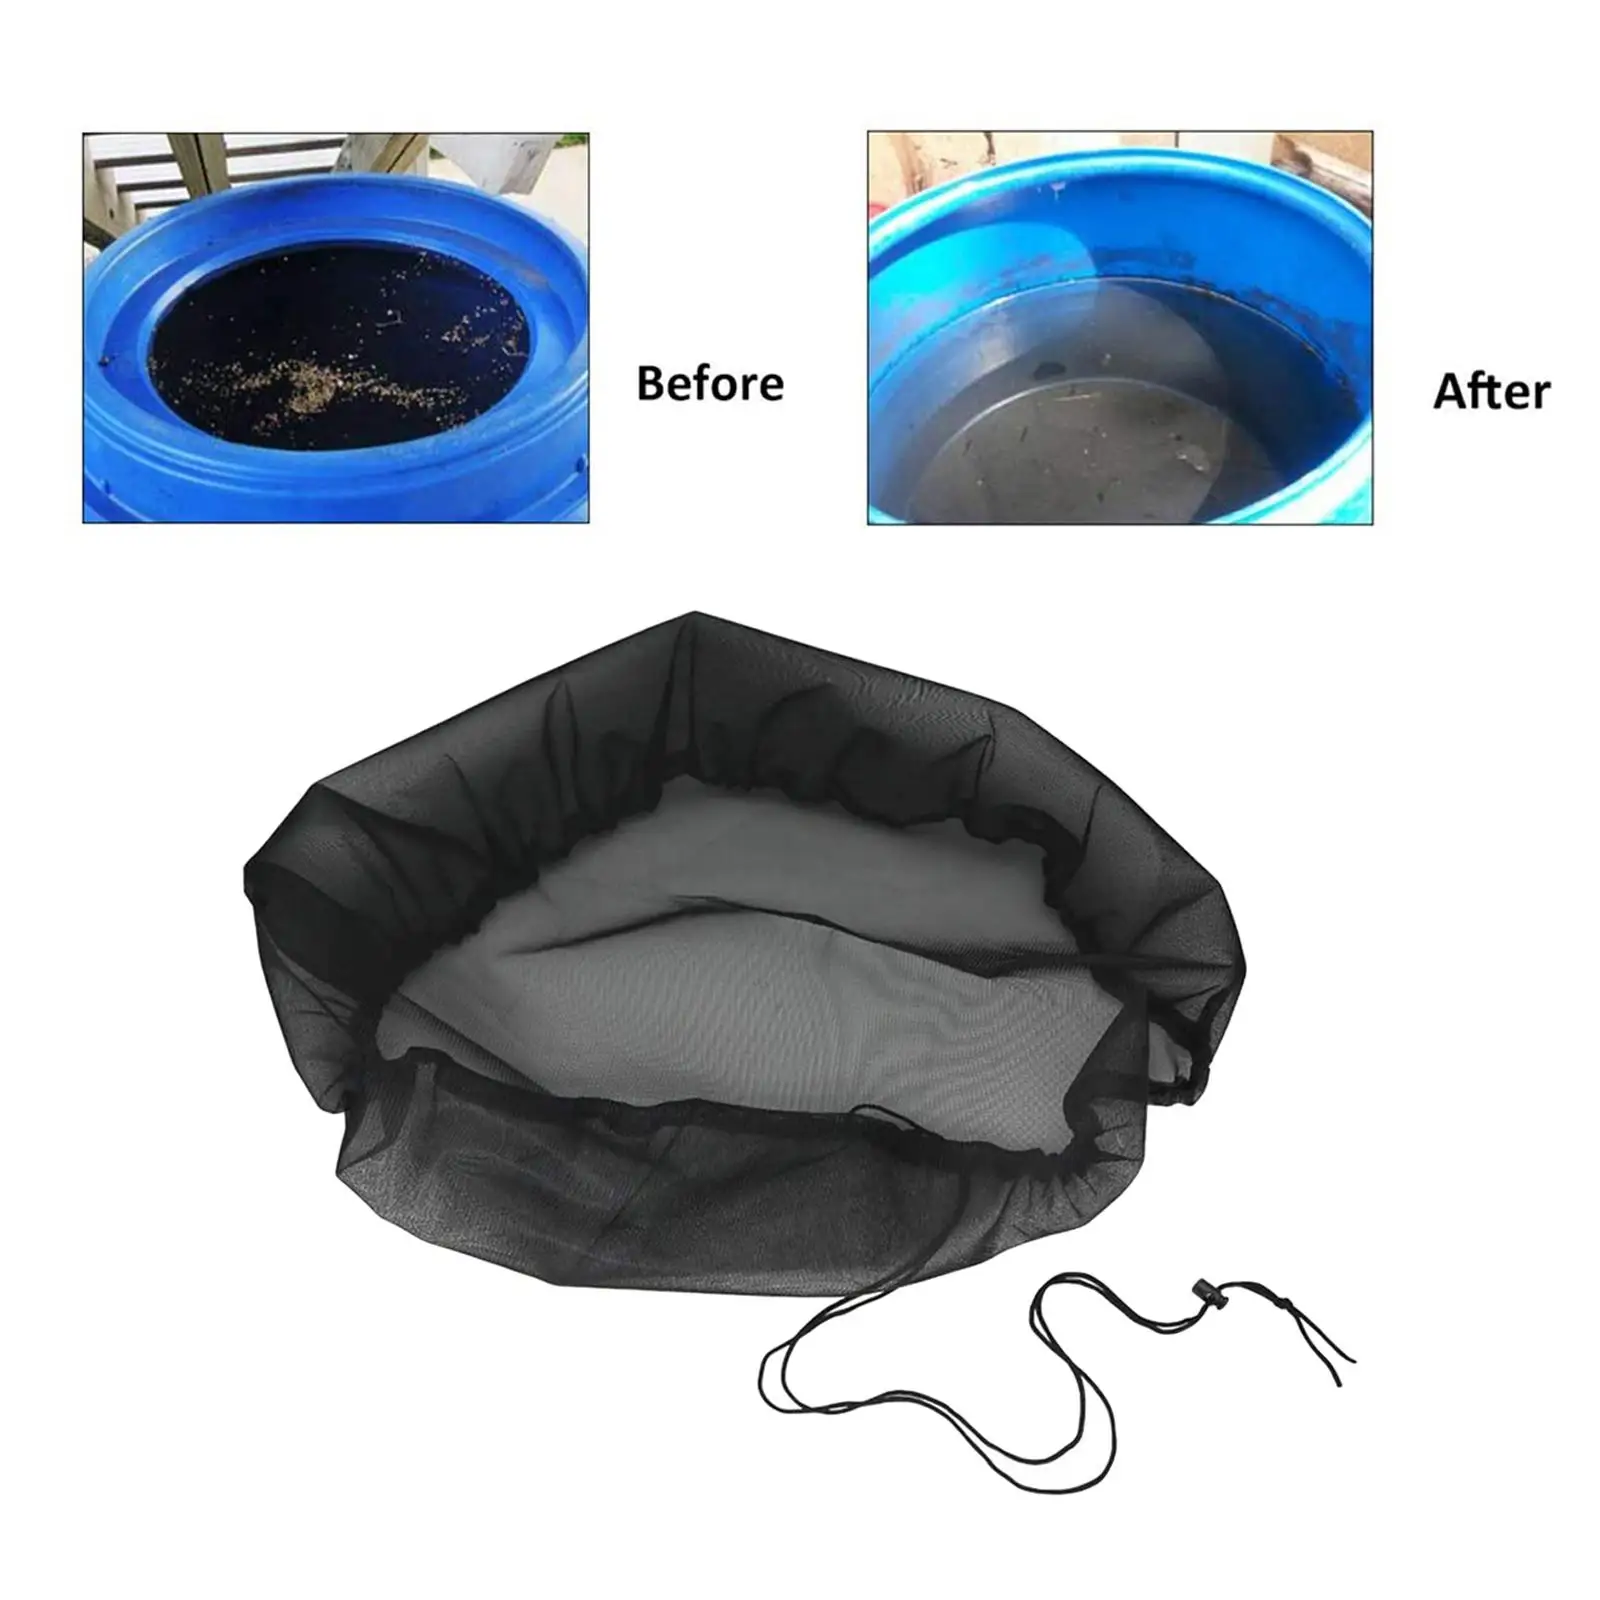 Outdoor Mesh Cover Netting with Drawstring Filter Leaves for Rain Barrels Garden